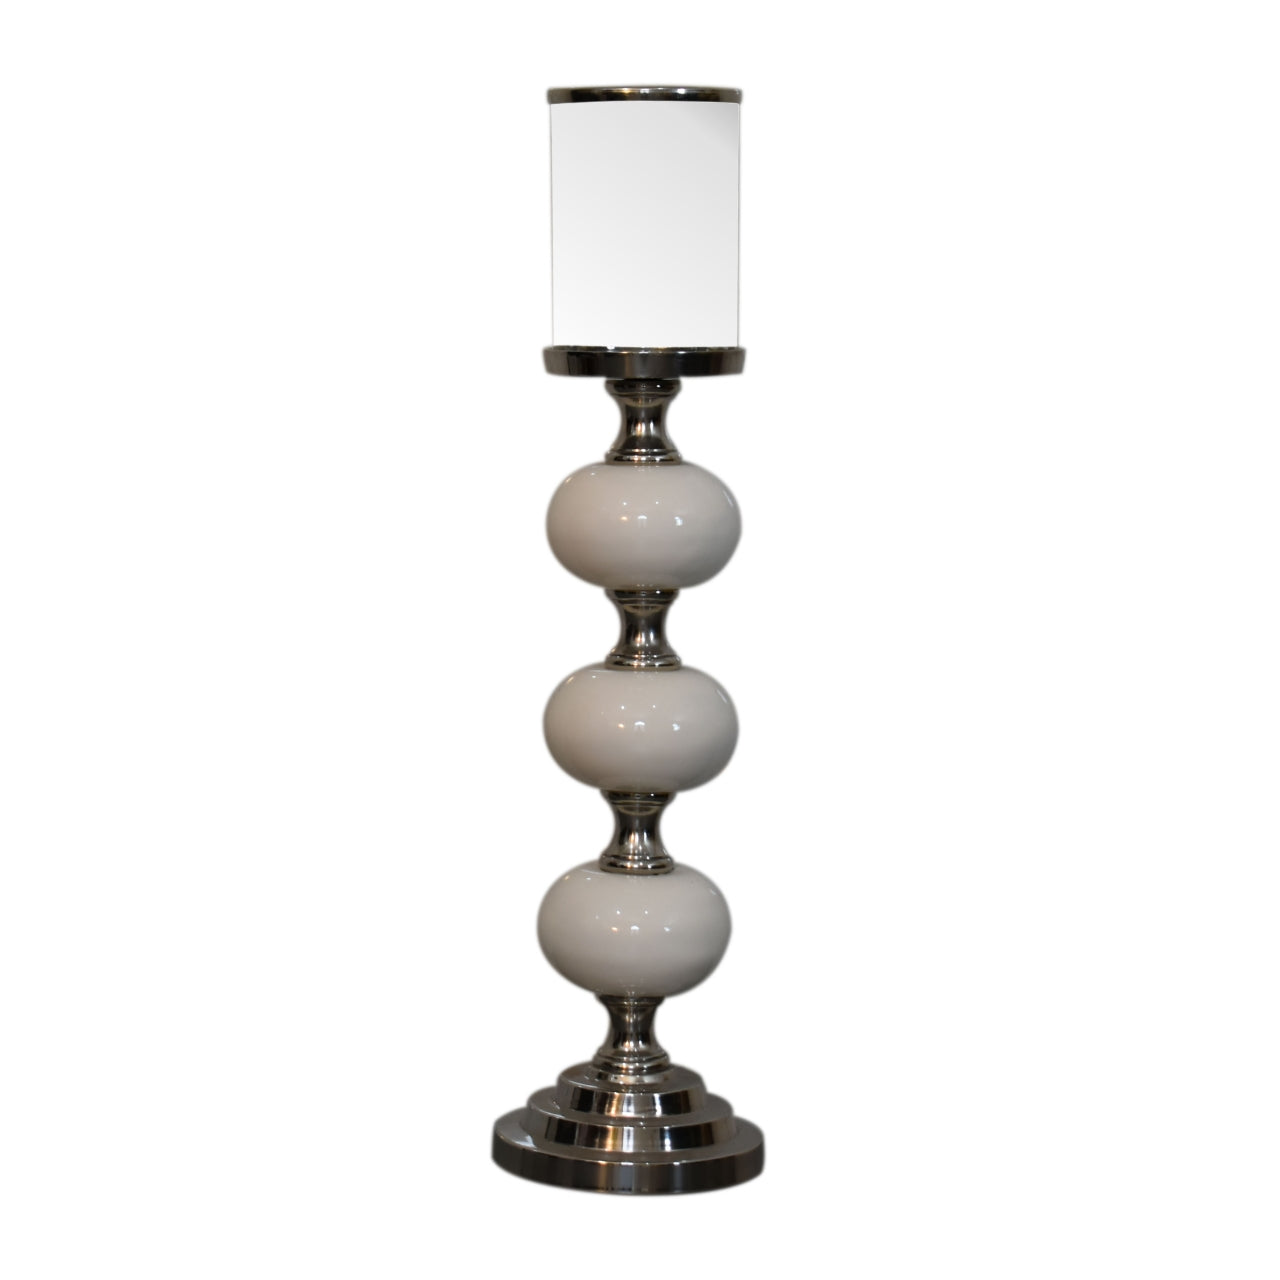 View Chrome Bubble Metal Candle Holder Set information